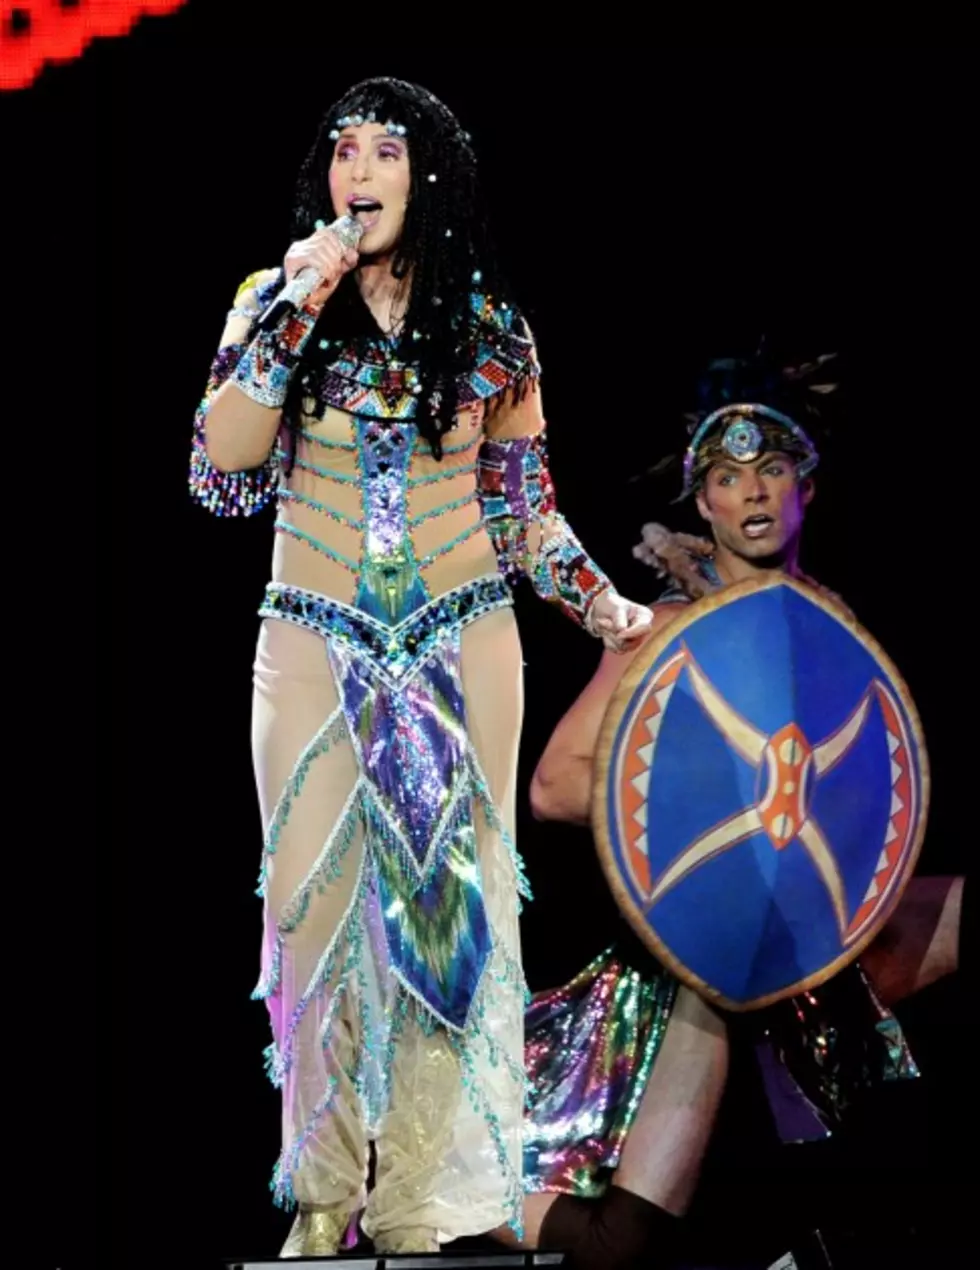 Cher To Perform At Century Link Center on November 15th